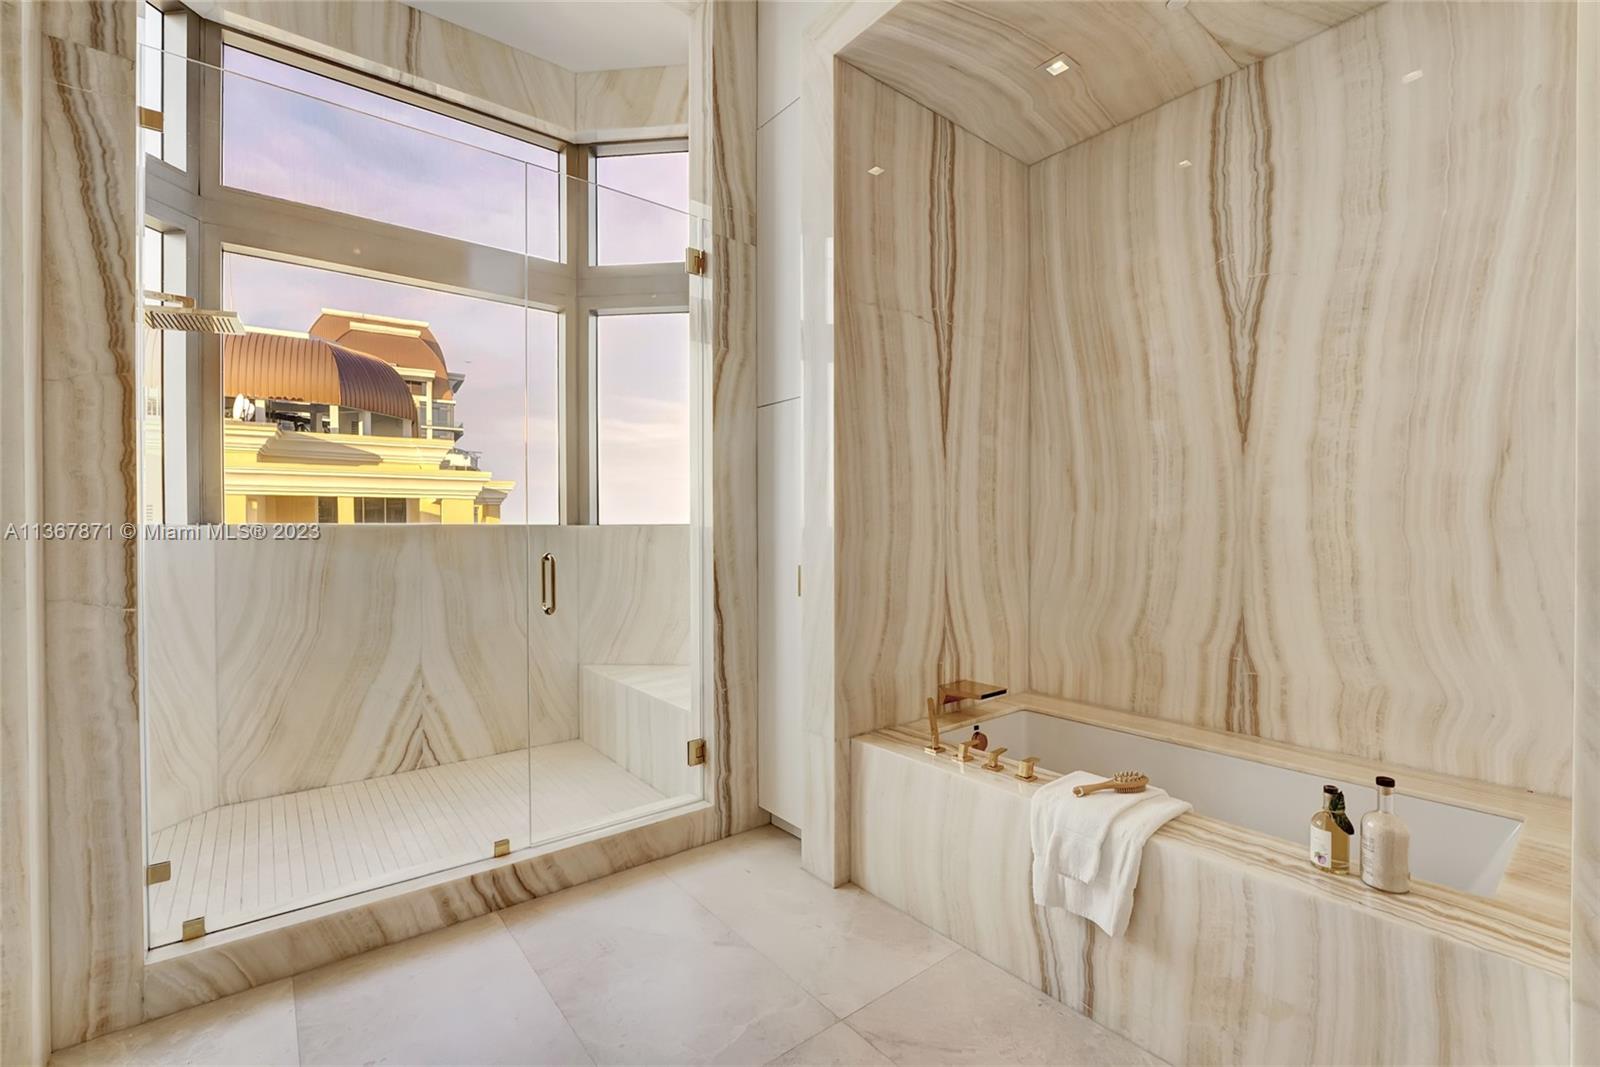 One of two luxurious master bathrooms - his and hers, of course.